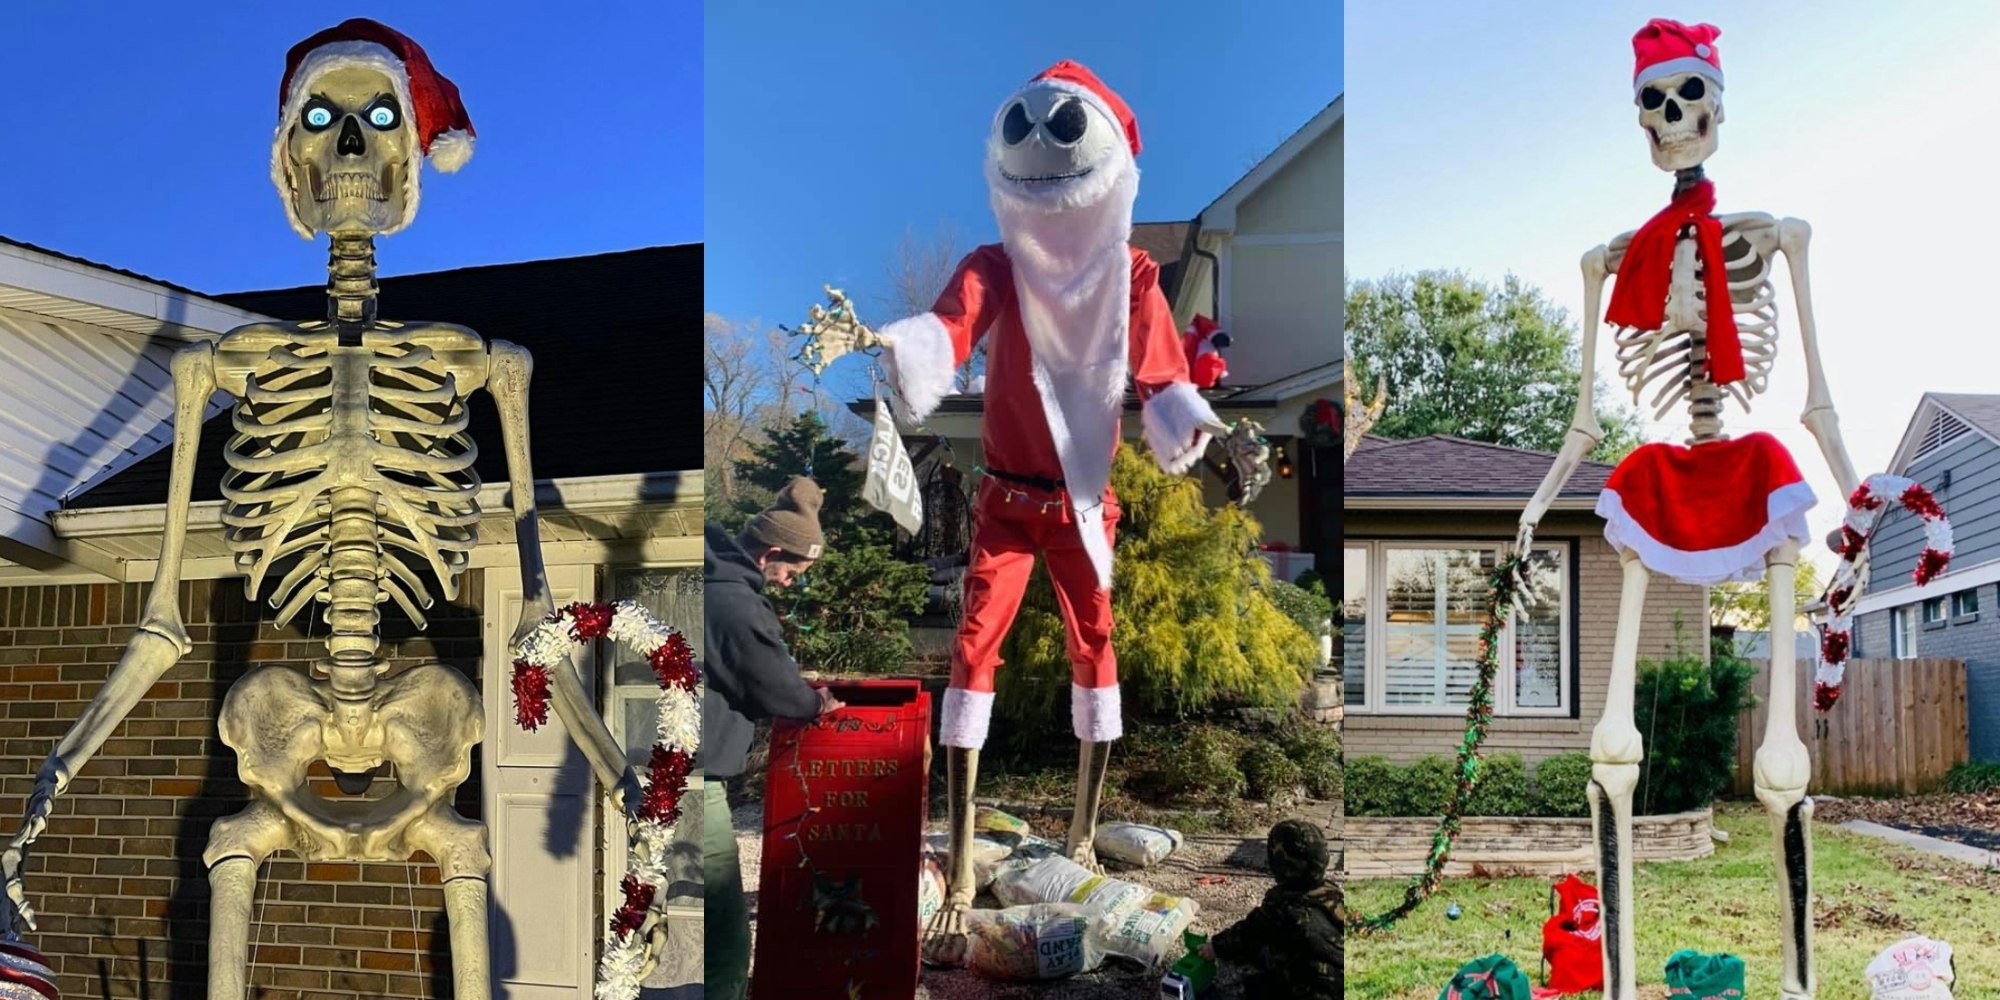 Home Depot Skeletons Are Now The Ultimate Christmas Lawn Flex